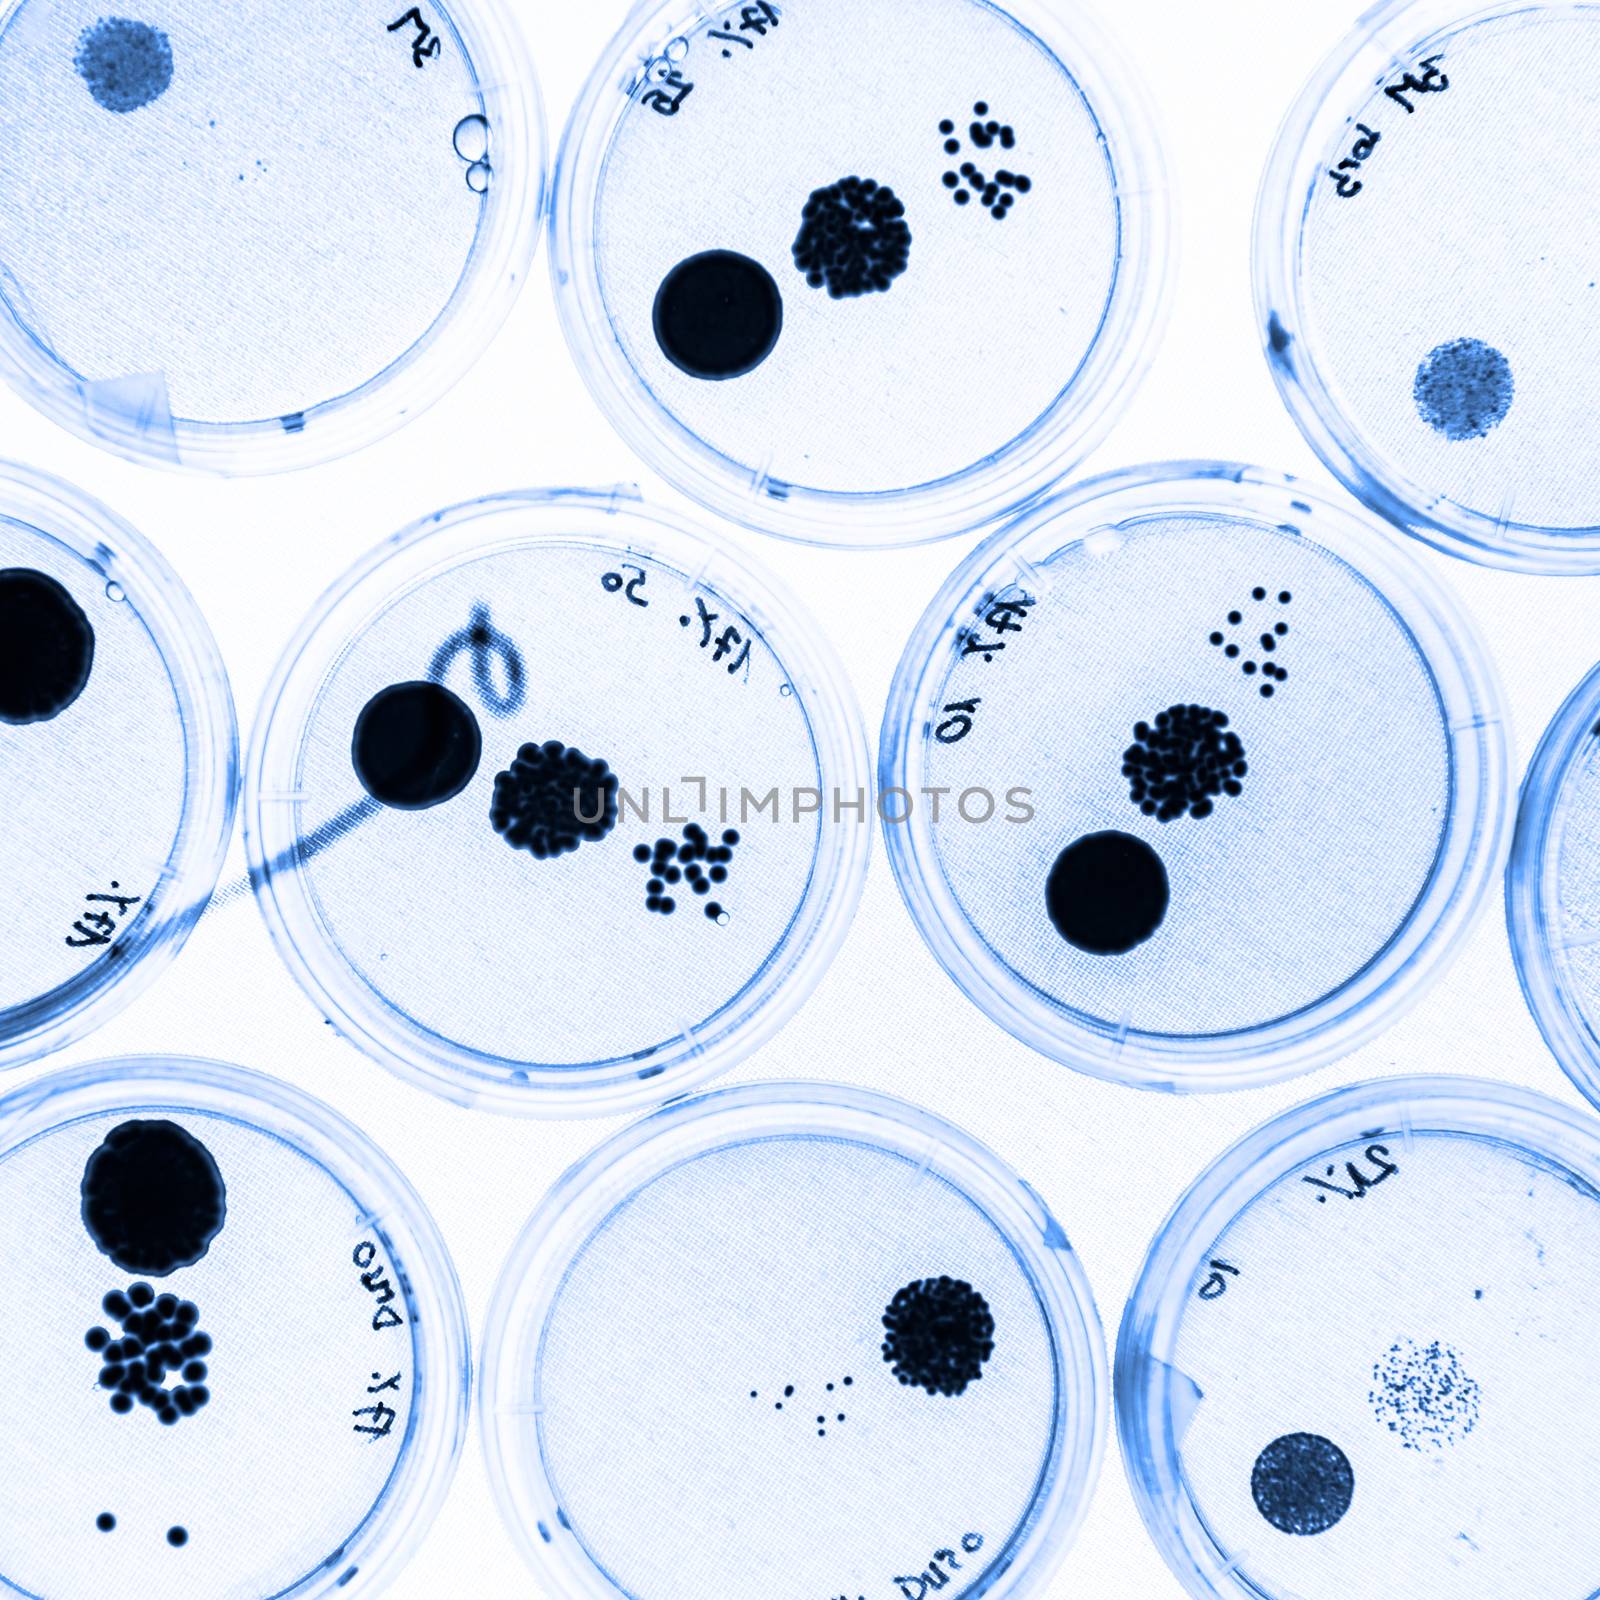 Growing Bacteria in Petri Dishes. by kasto